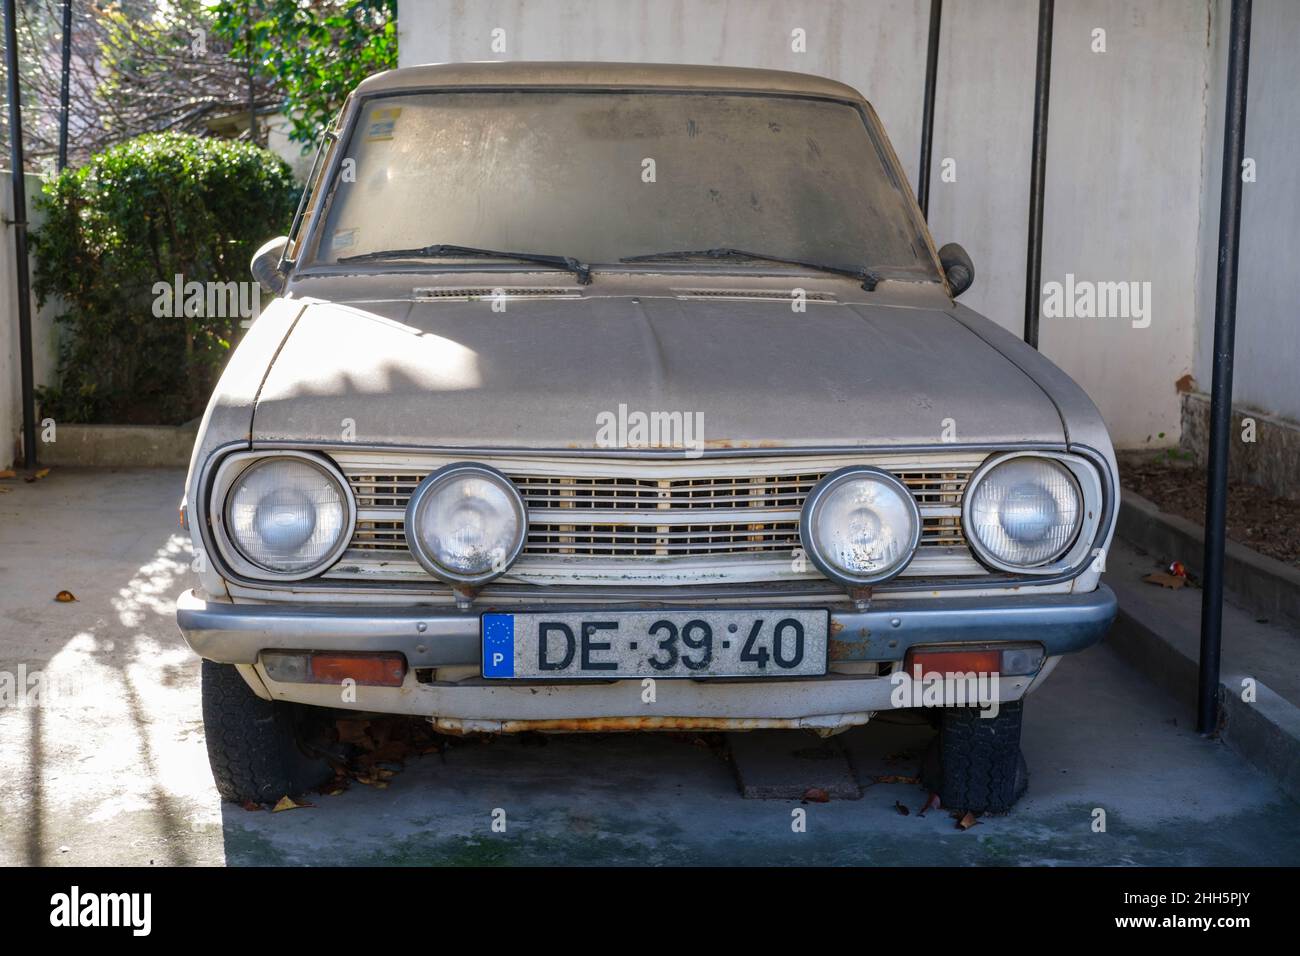 Castelo Branco, Portugal - January 09 2022: Abandoned Datsun 1200 sat under a layer of dust in Central Portugal Castelo Branco Stock Photo